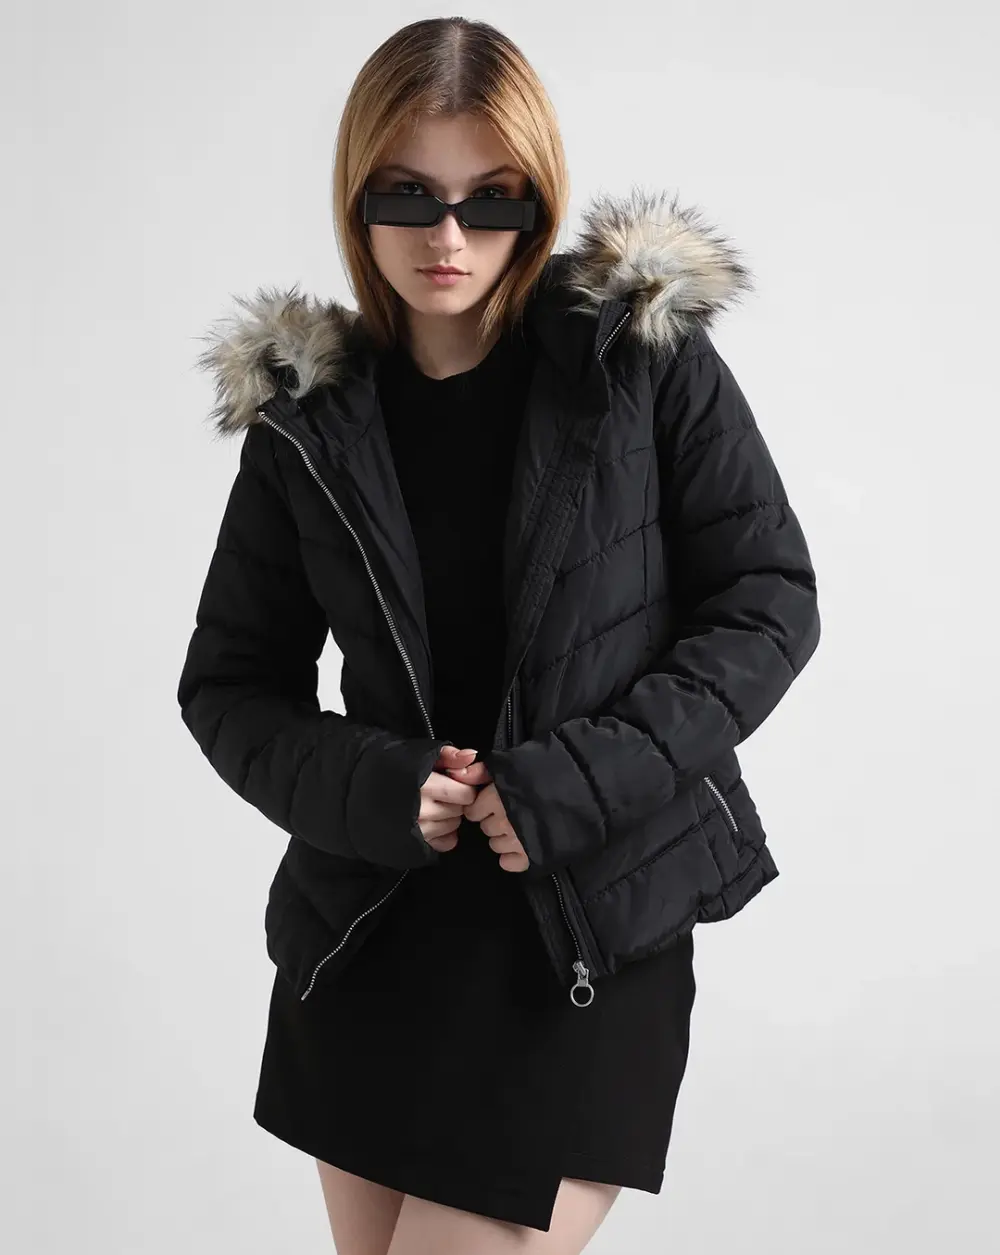 Buy Black Faux Fur Hooded Jacket Online at Best Price in India - Suvidha  Stores